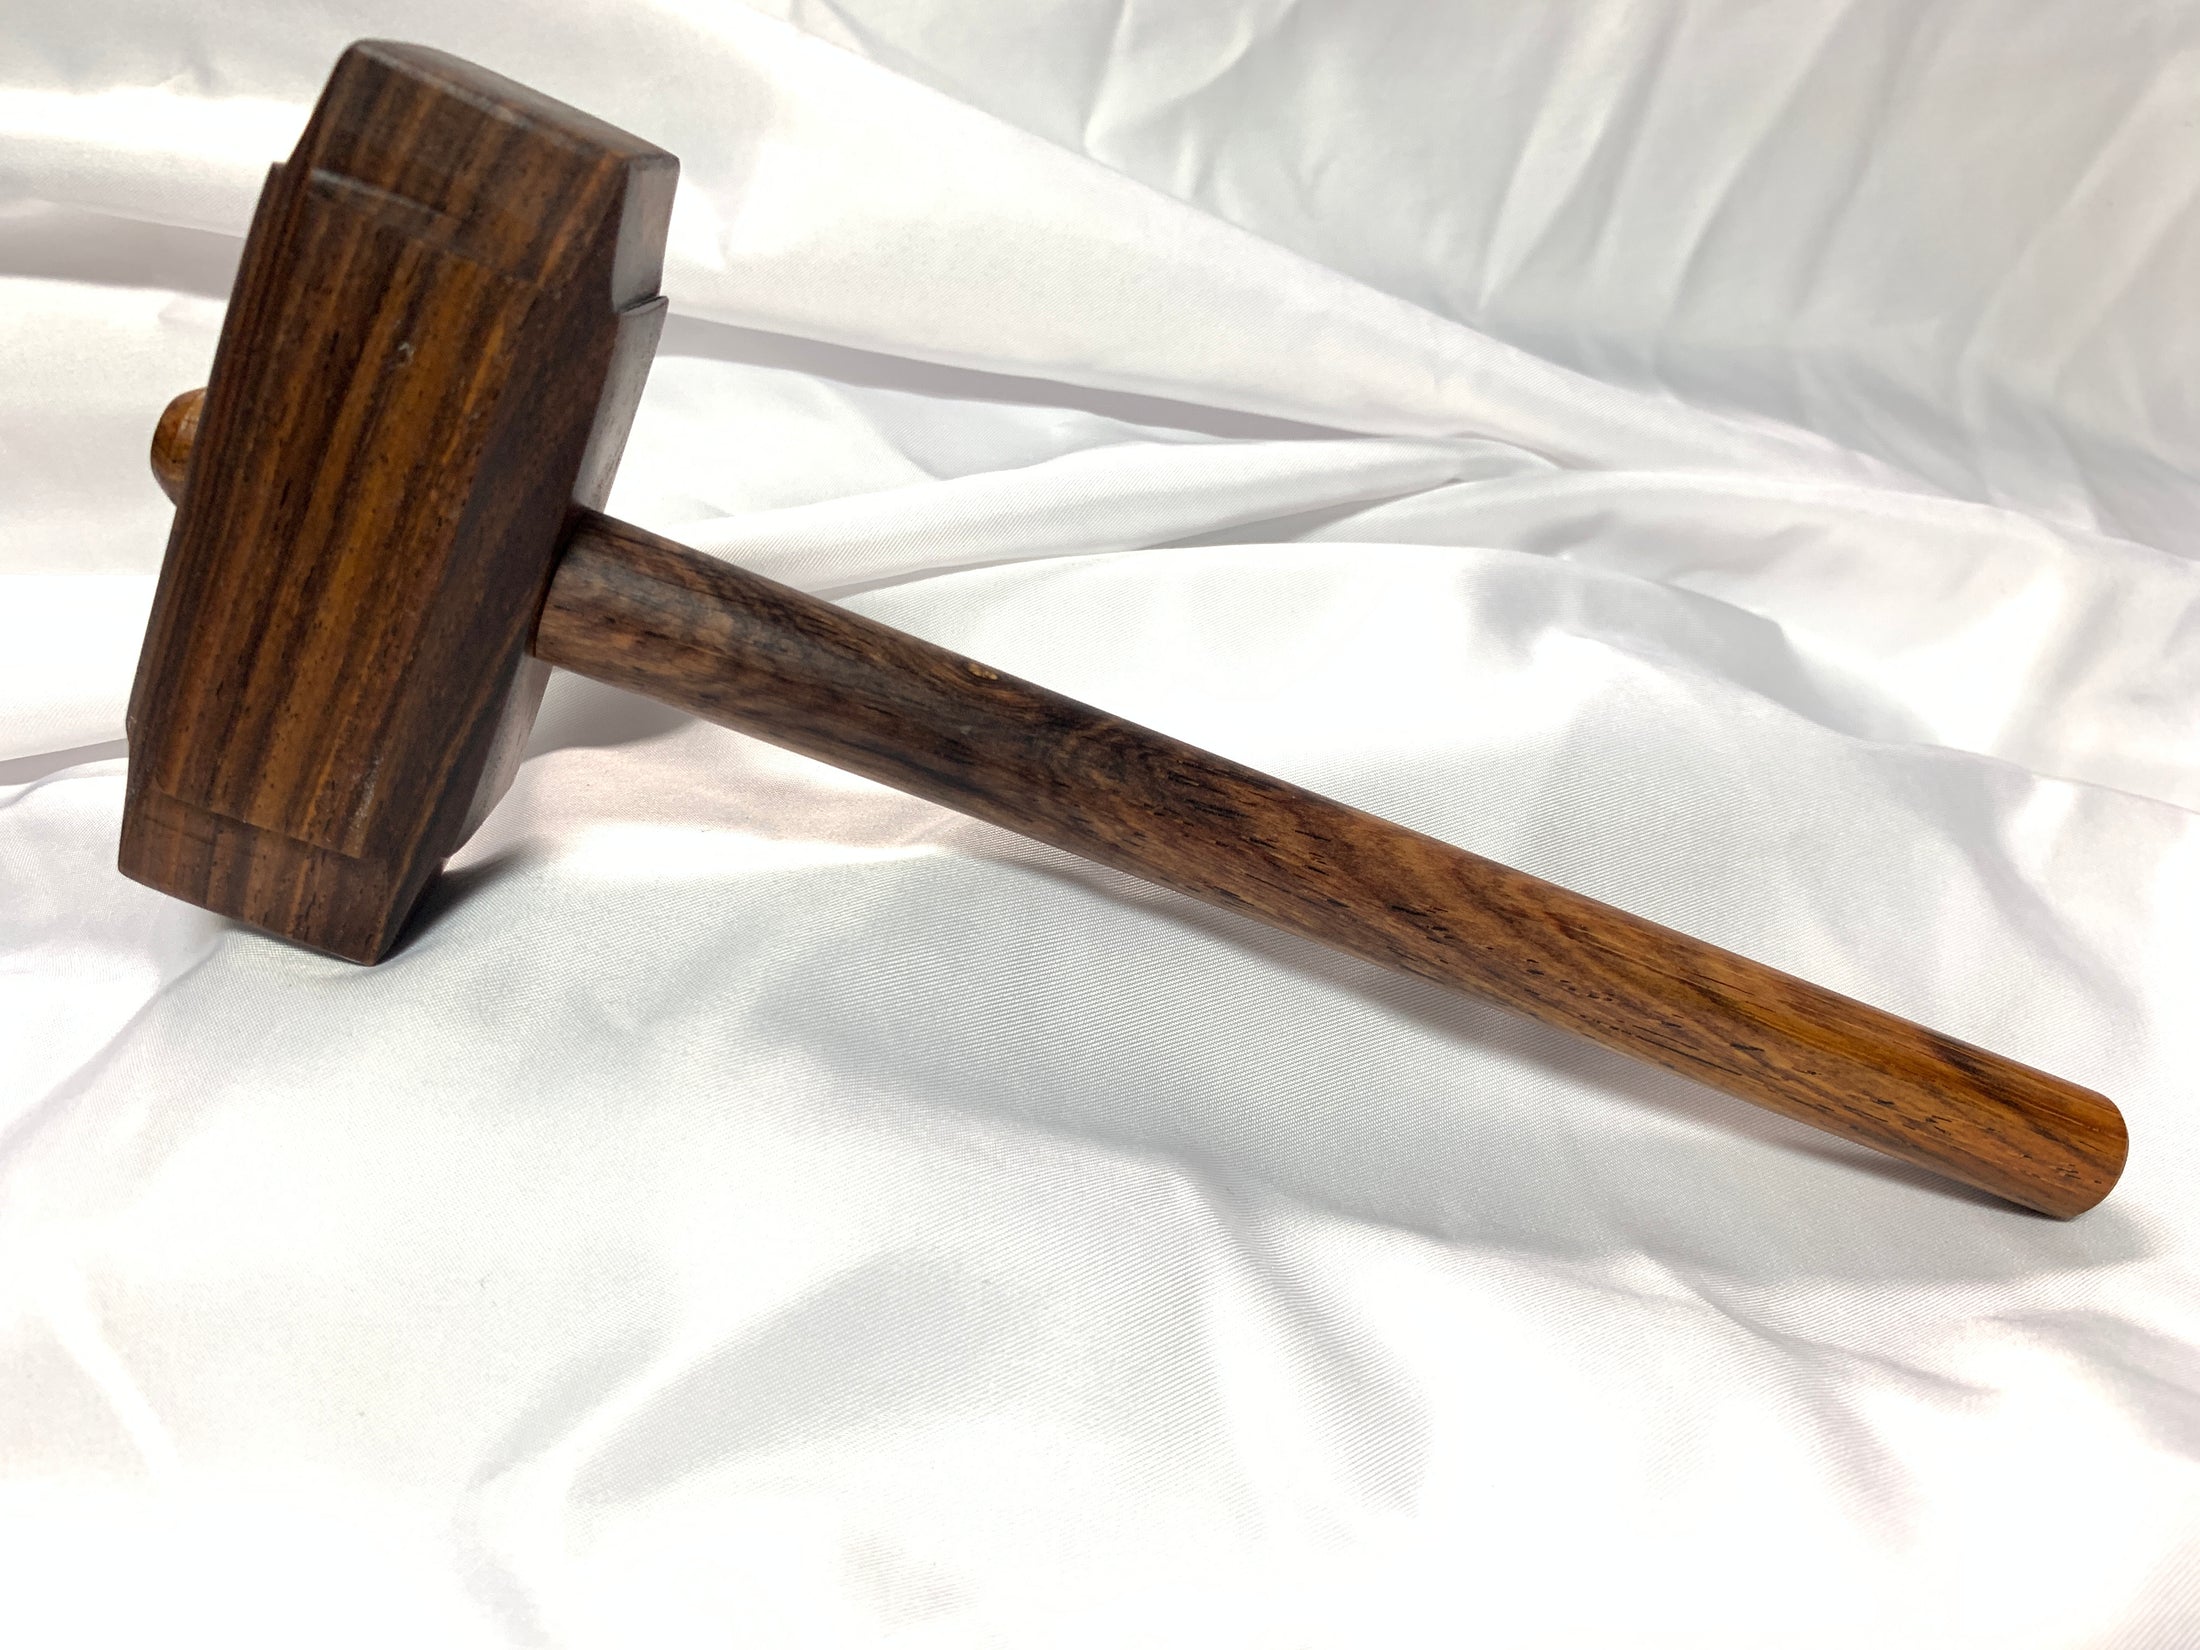 Thors Hammer Woodworking Mallet Cocobolo Head with Cocobolo Handle Kings Fine Woodworking